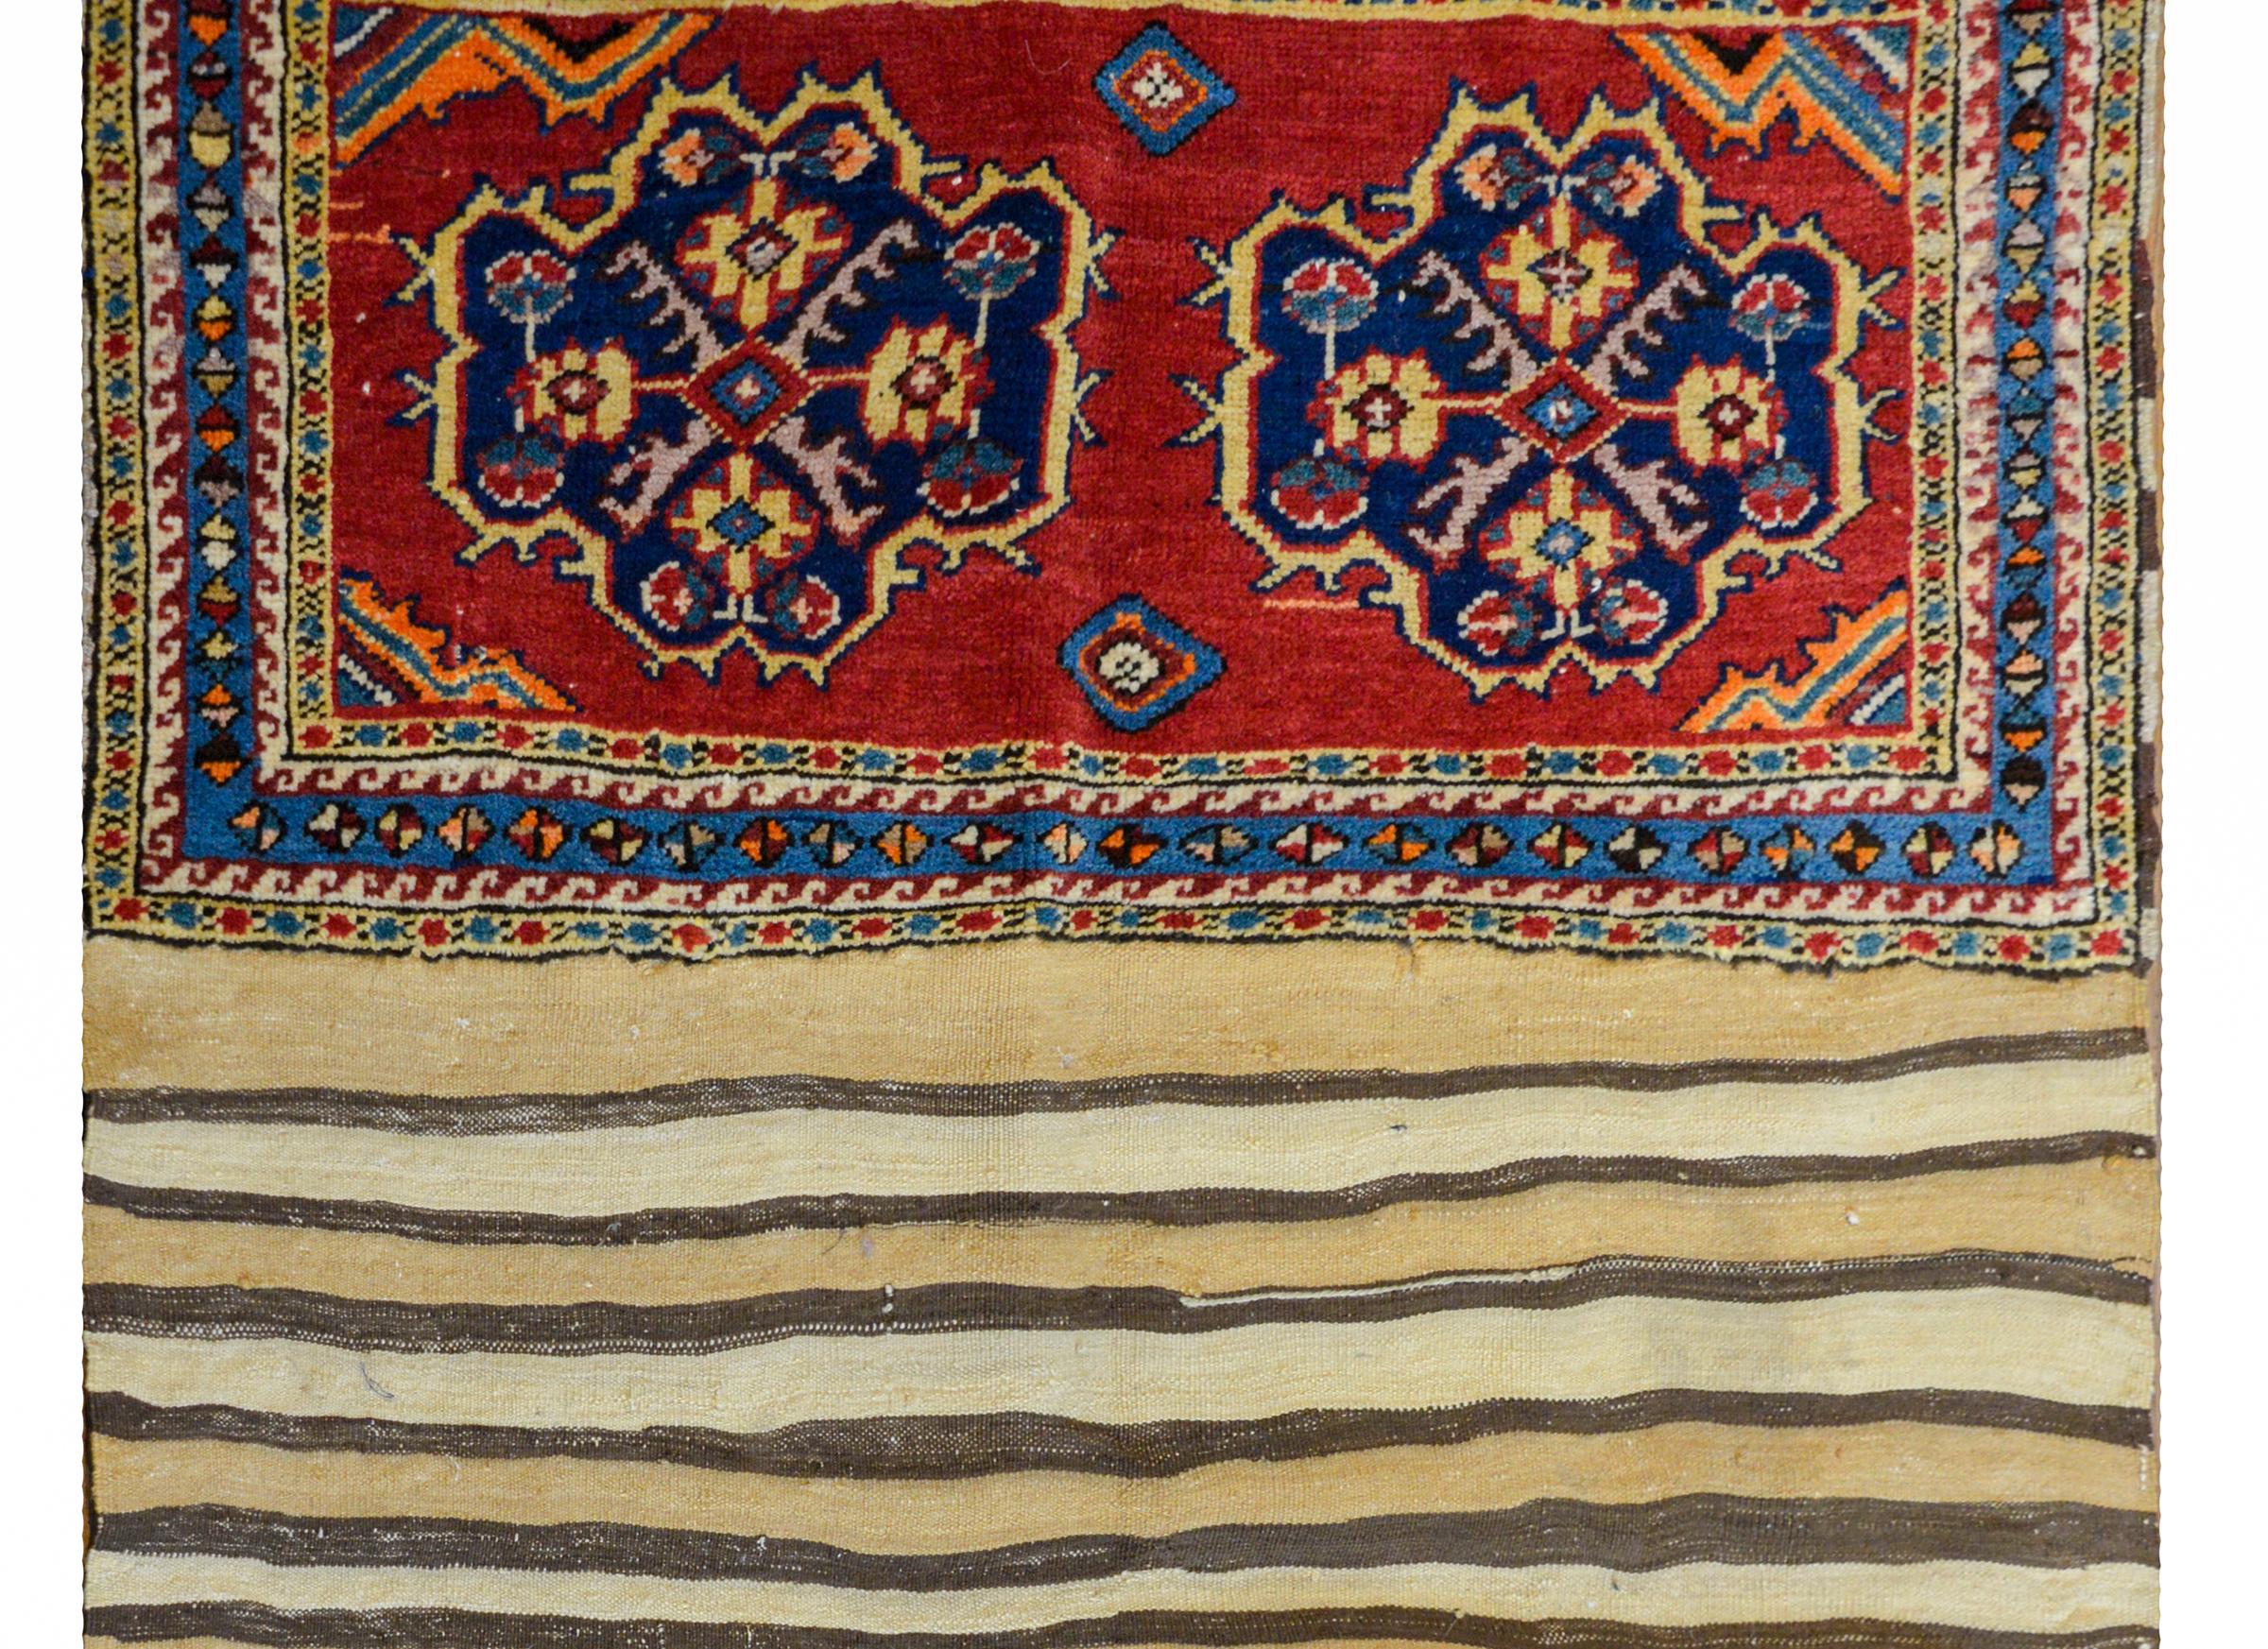 A rare early 20th century Persian Lori horse blanket with a striped flat-weave back with each end having a handwoven pattern containing two medallions with stylized floral patterns on a dark crimson ground.